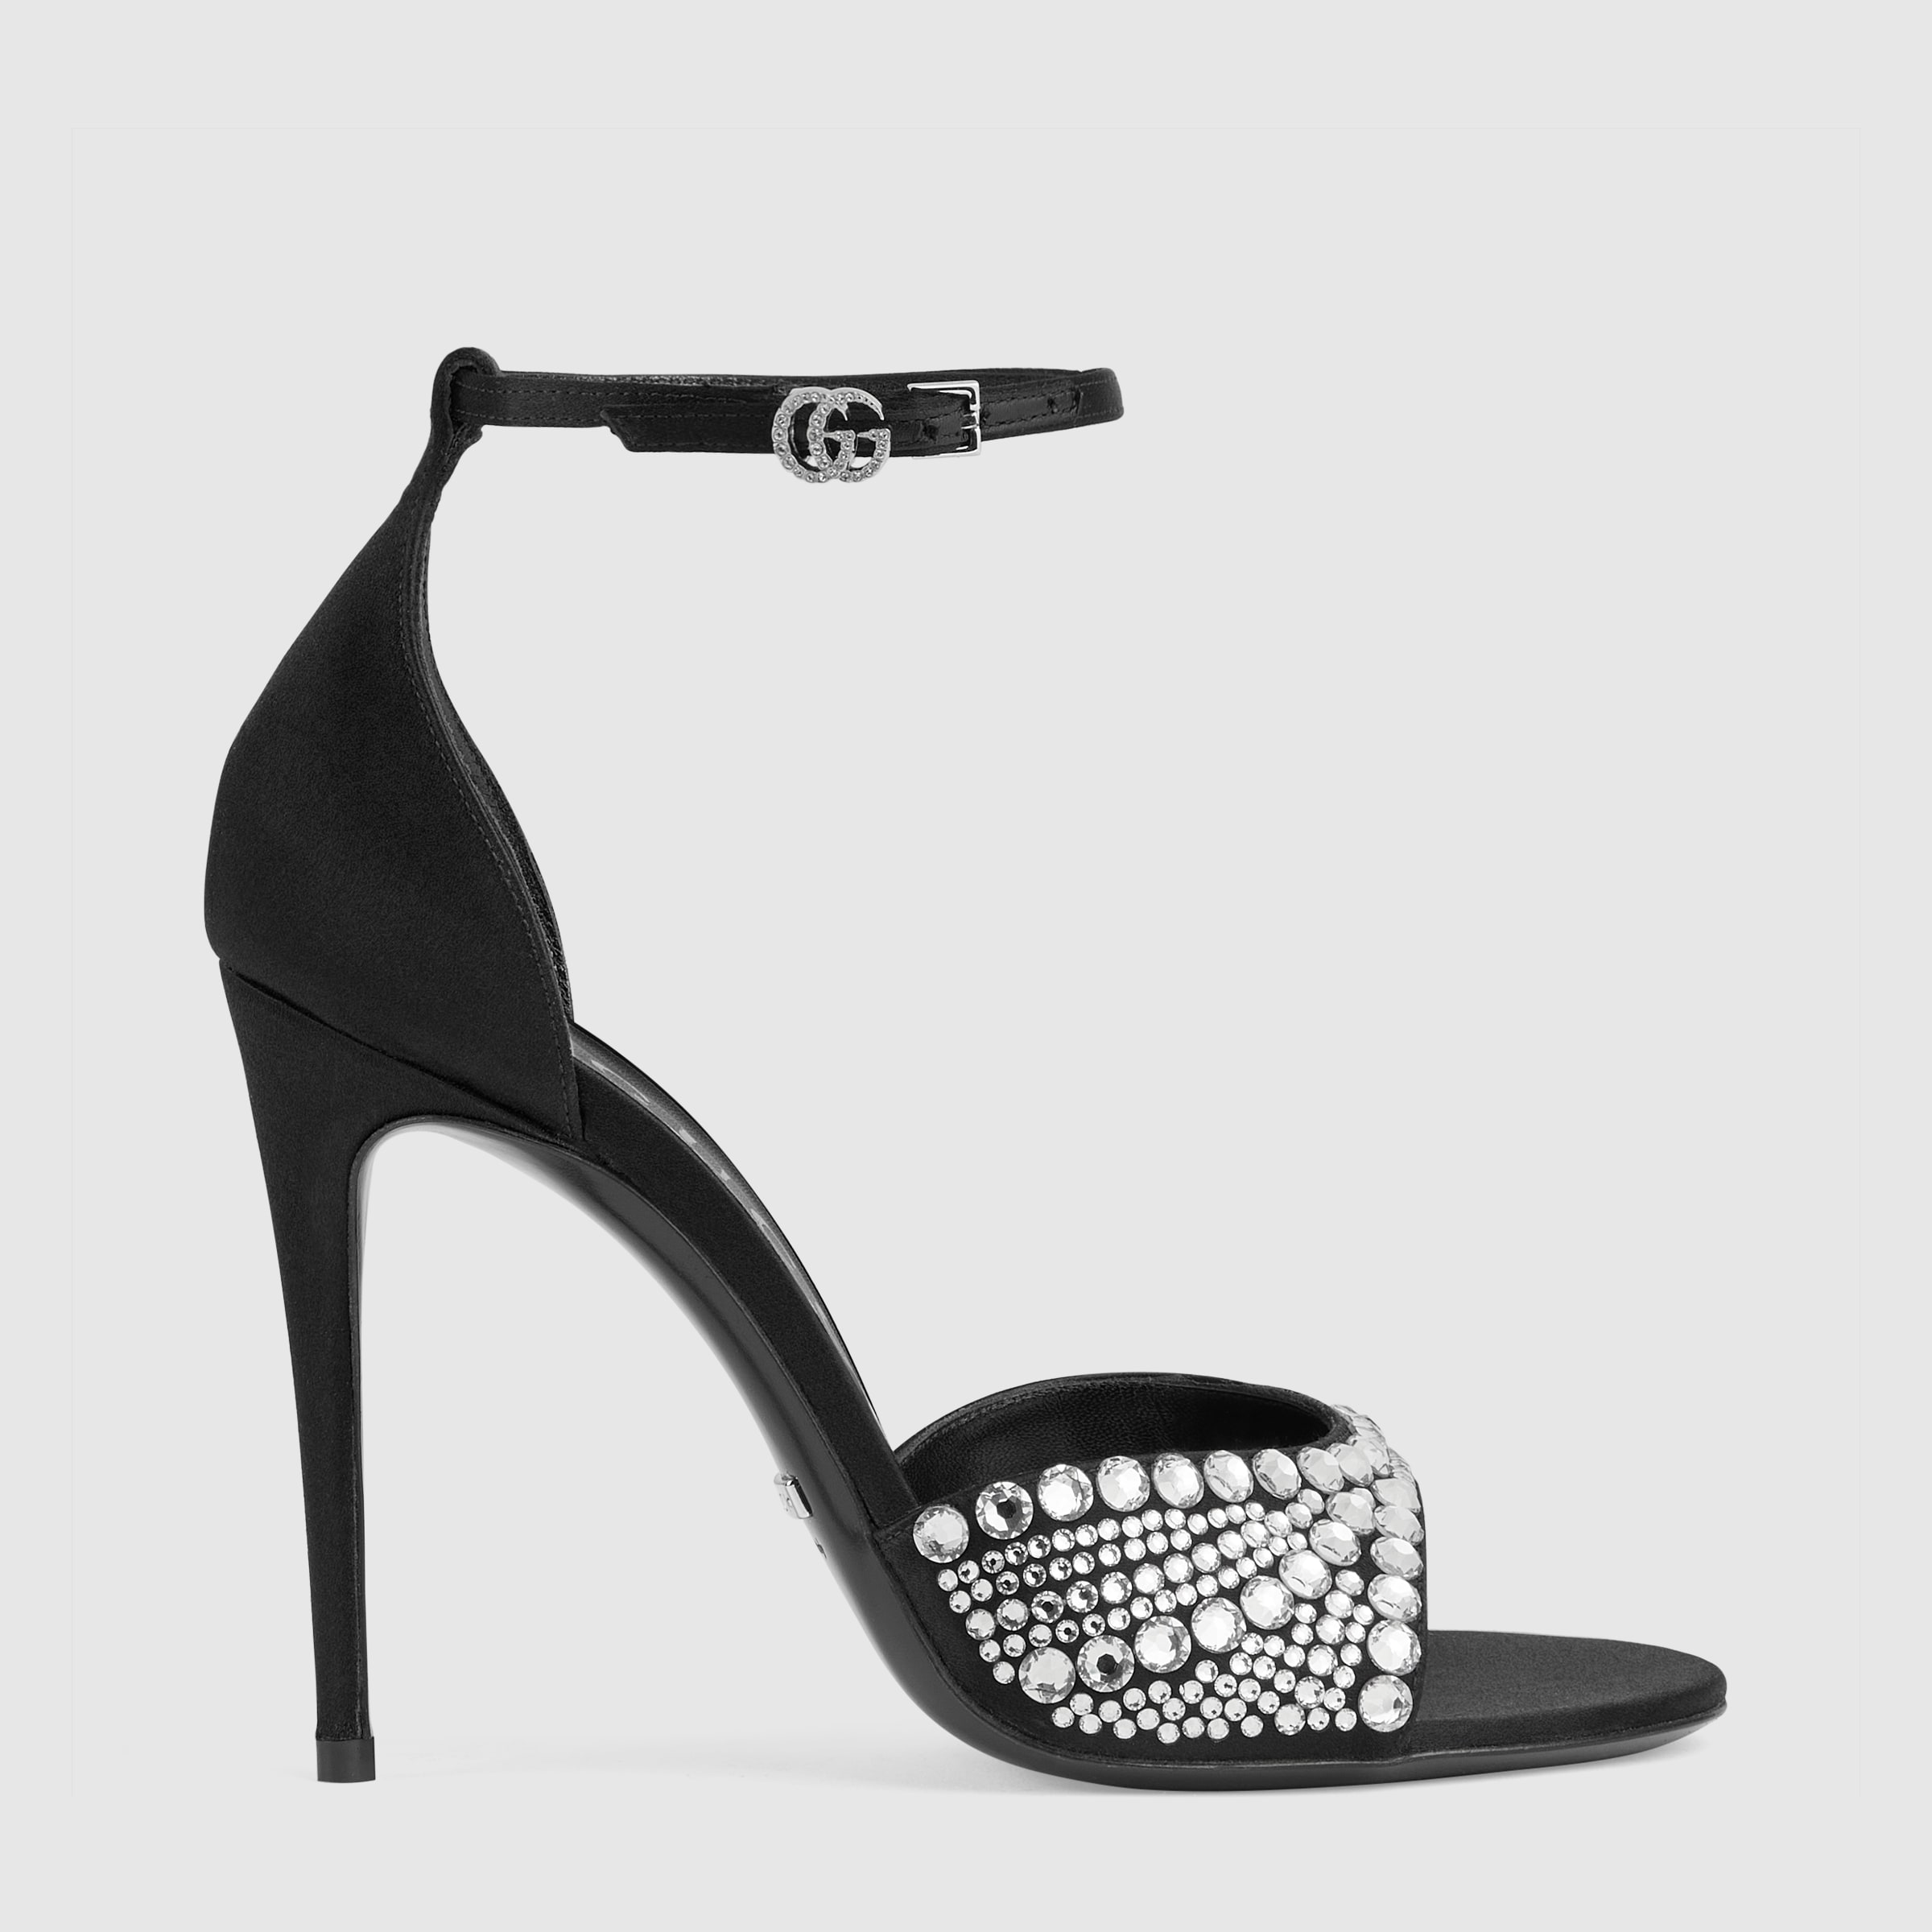 Women's high heel gucci sandals with crystals